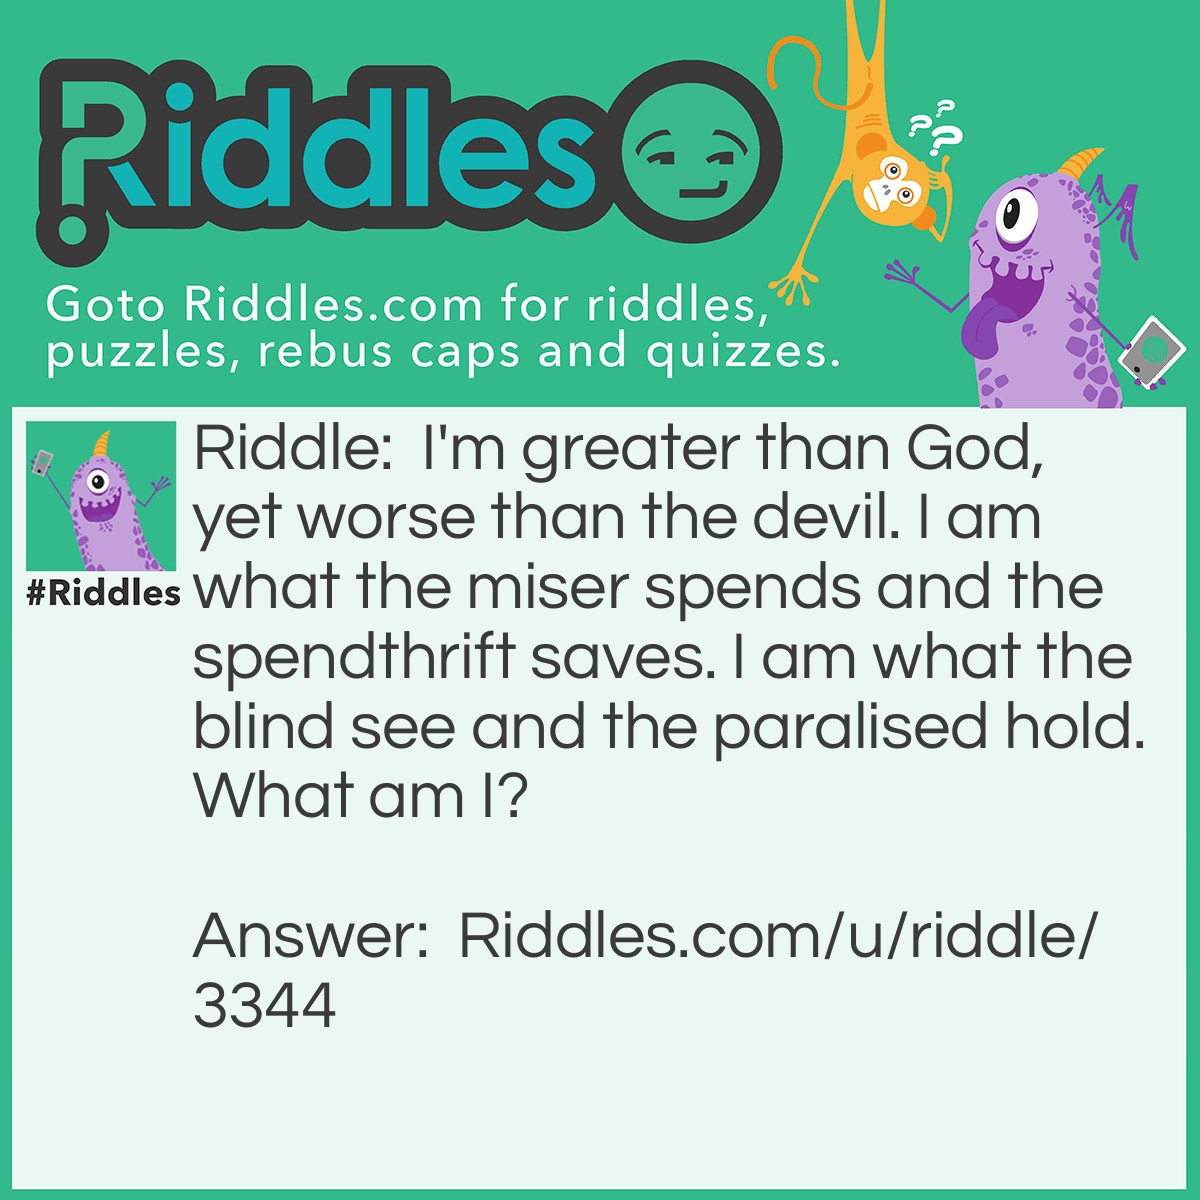 Riddle: I'm greater than God, yet worse than the devil. I am what the miser spends and the spendthrift saves. I am what the blind see and the paralised hold. What am I? Answer: Nothing.